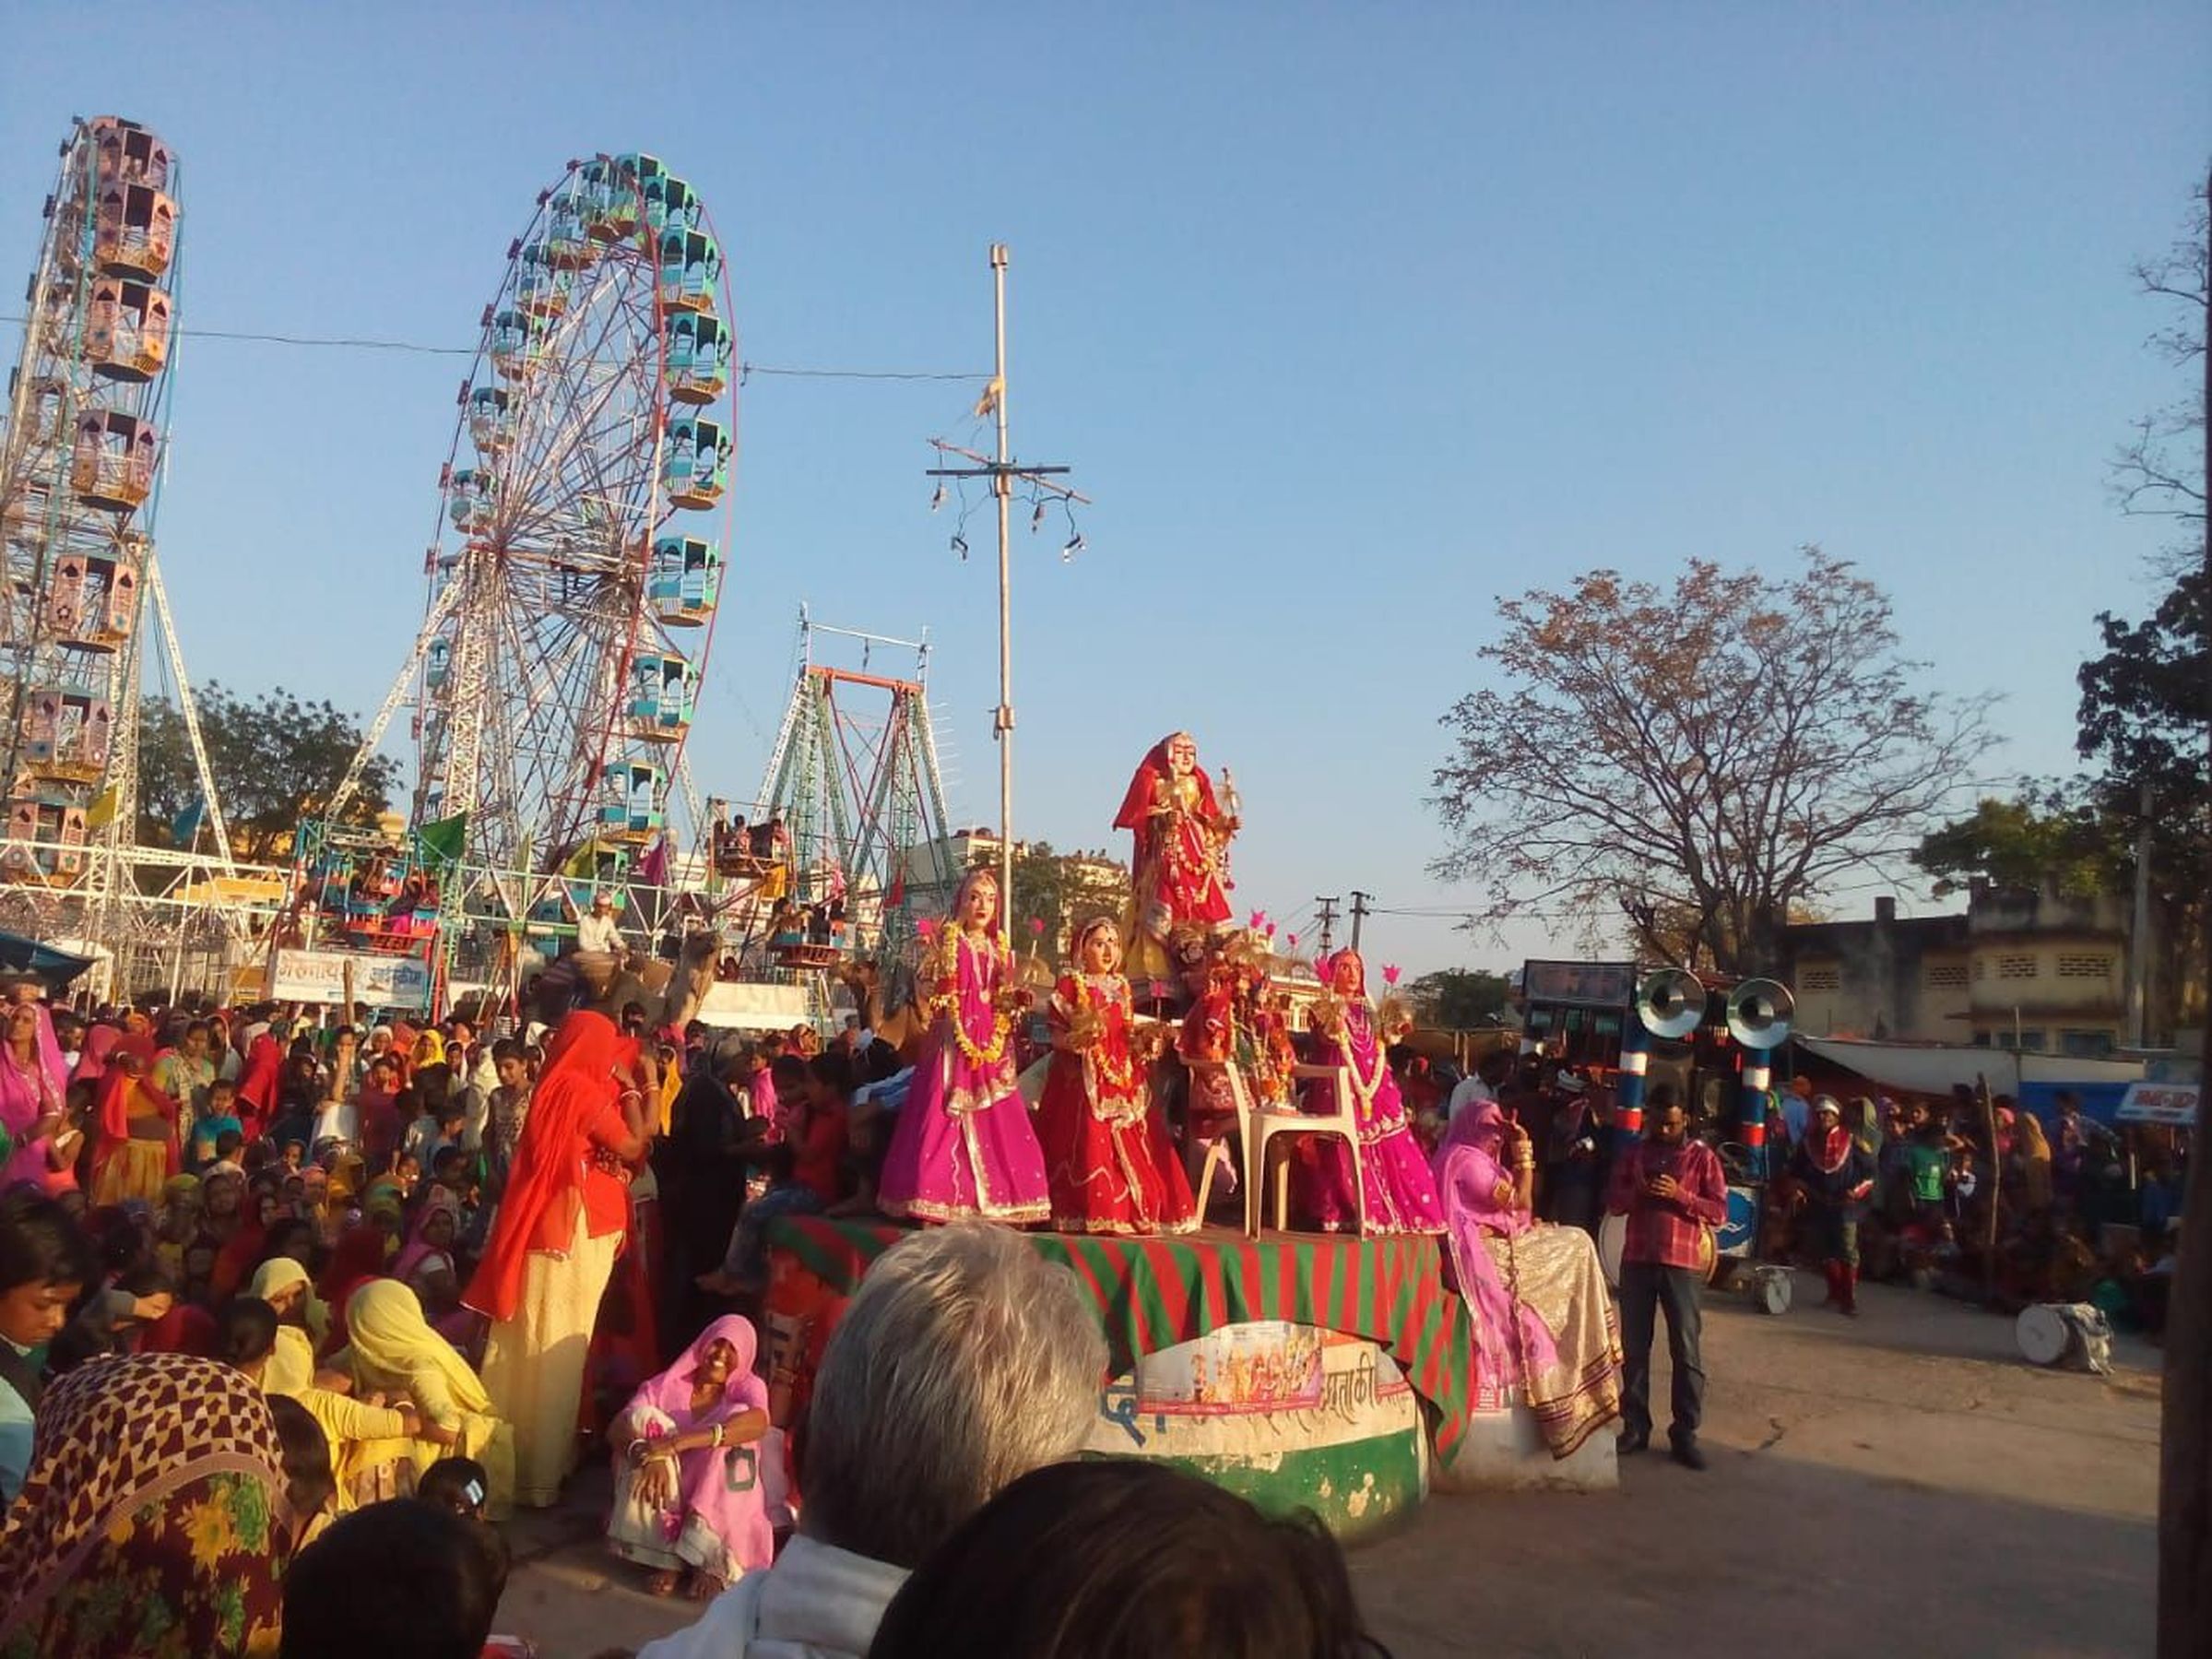 Gangaur fair in Gogunda for 67 years, there is a reconciliation of many cultures